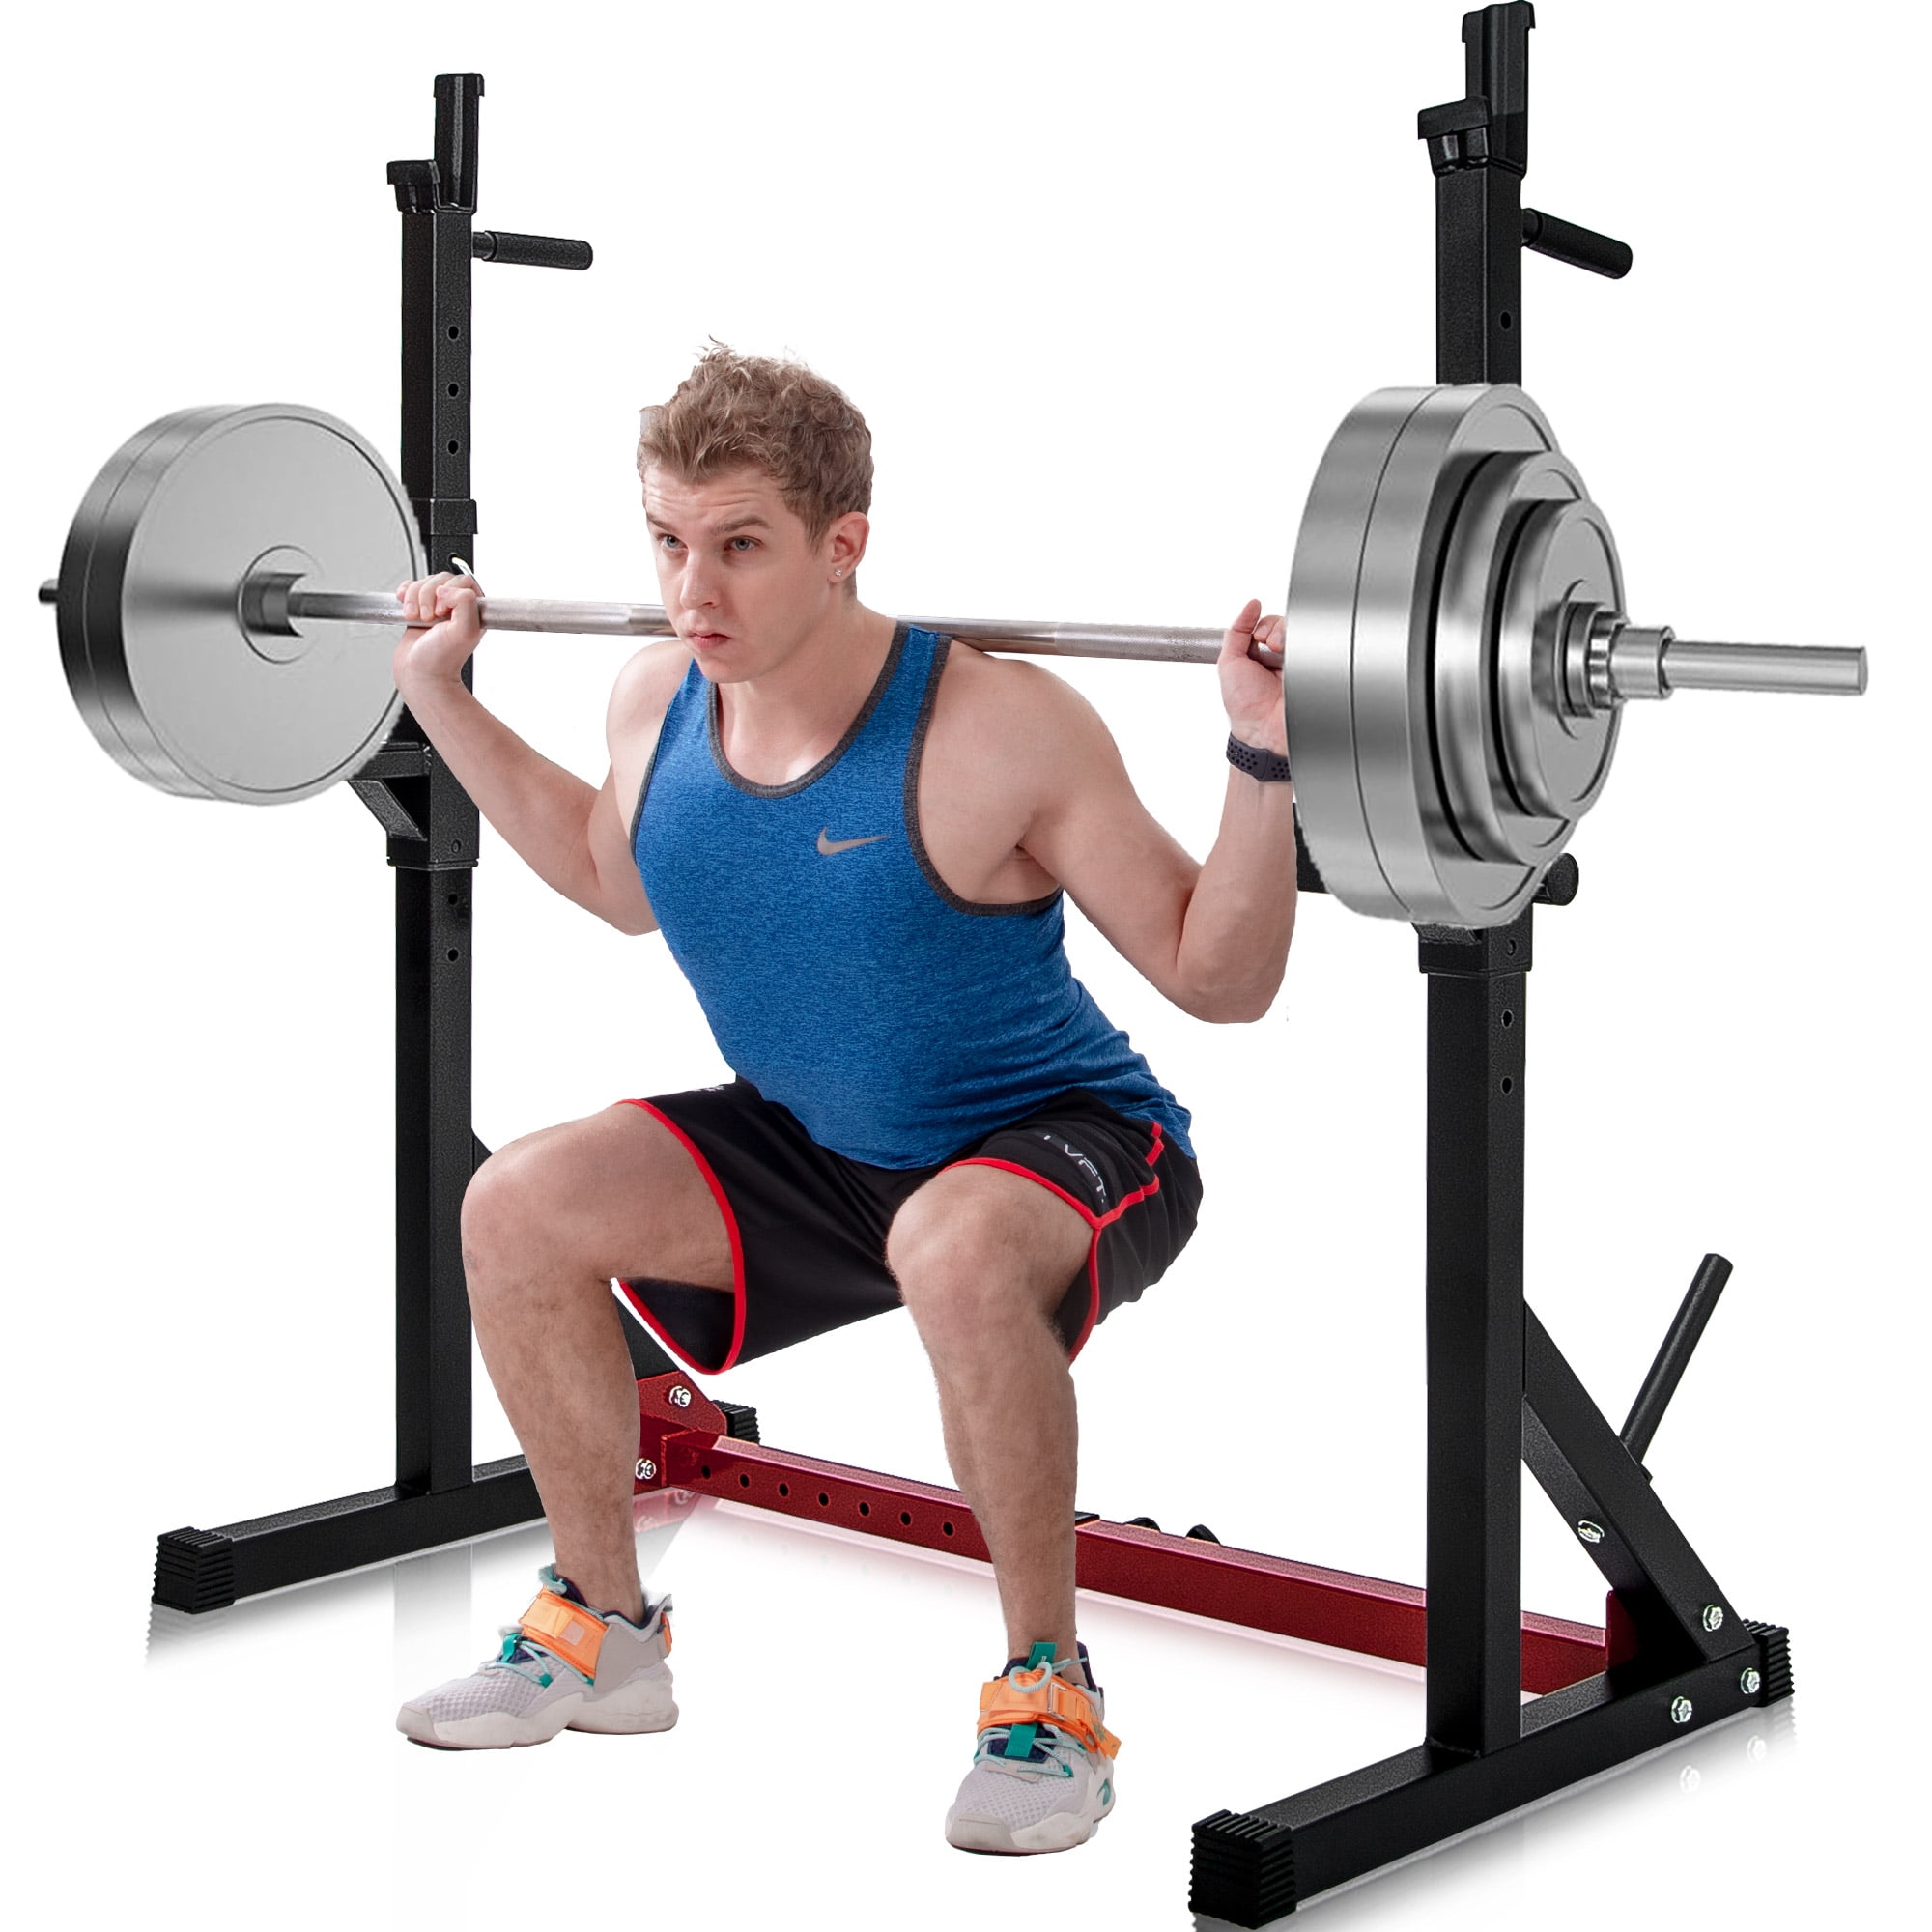 3in1 Adjustable Barbell Squat Rack Dip Stands Bench Press Push Up Power Rack 300 